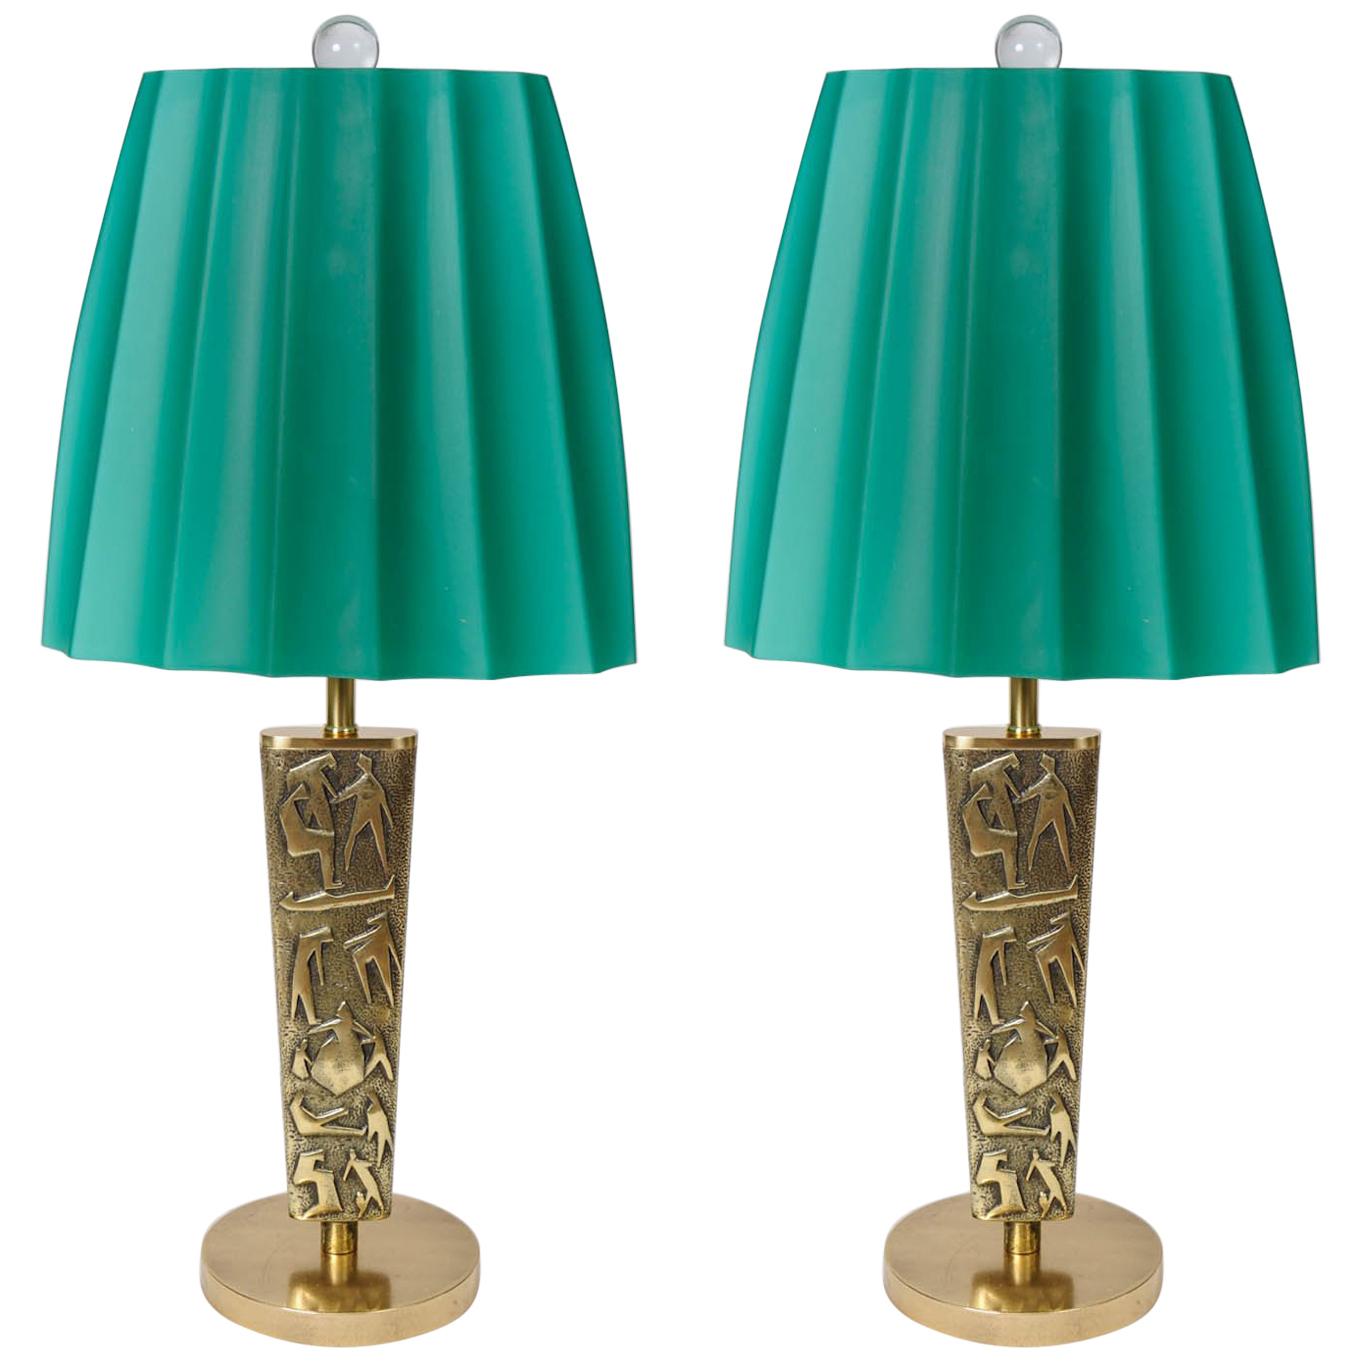 Pair of Bronze Table Lamps with Green Opaline Glass Shade